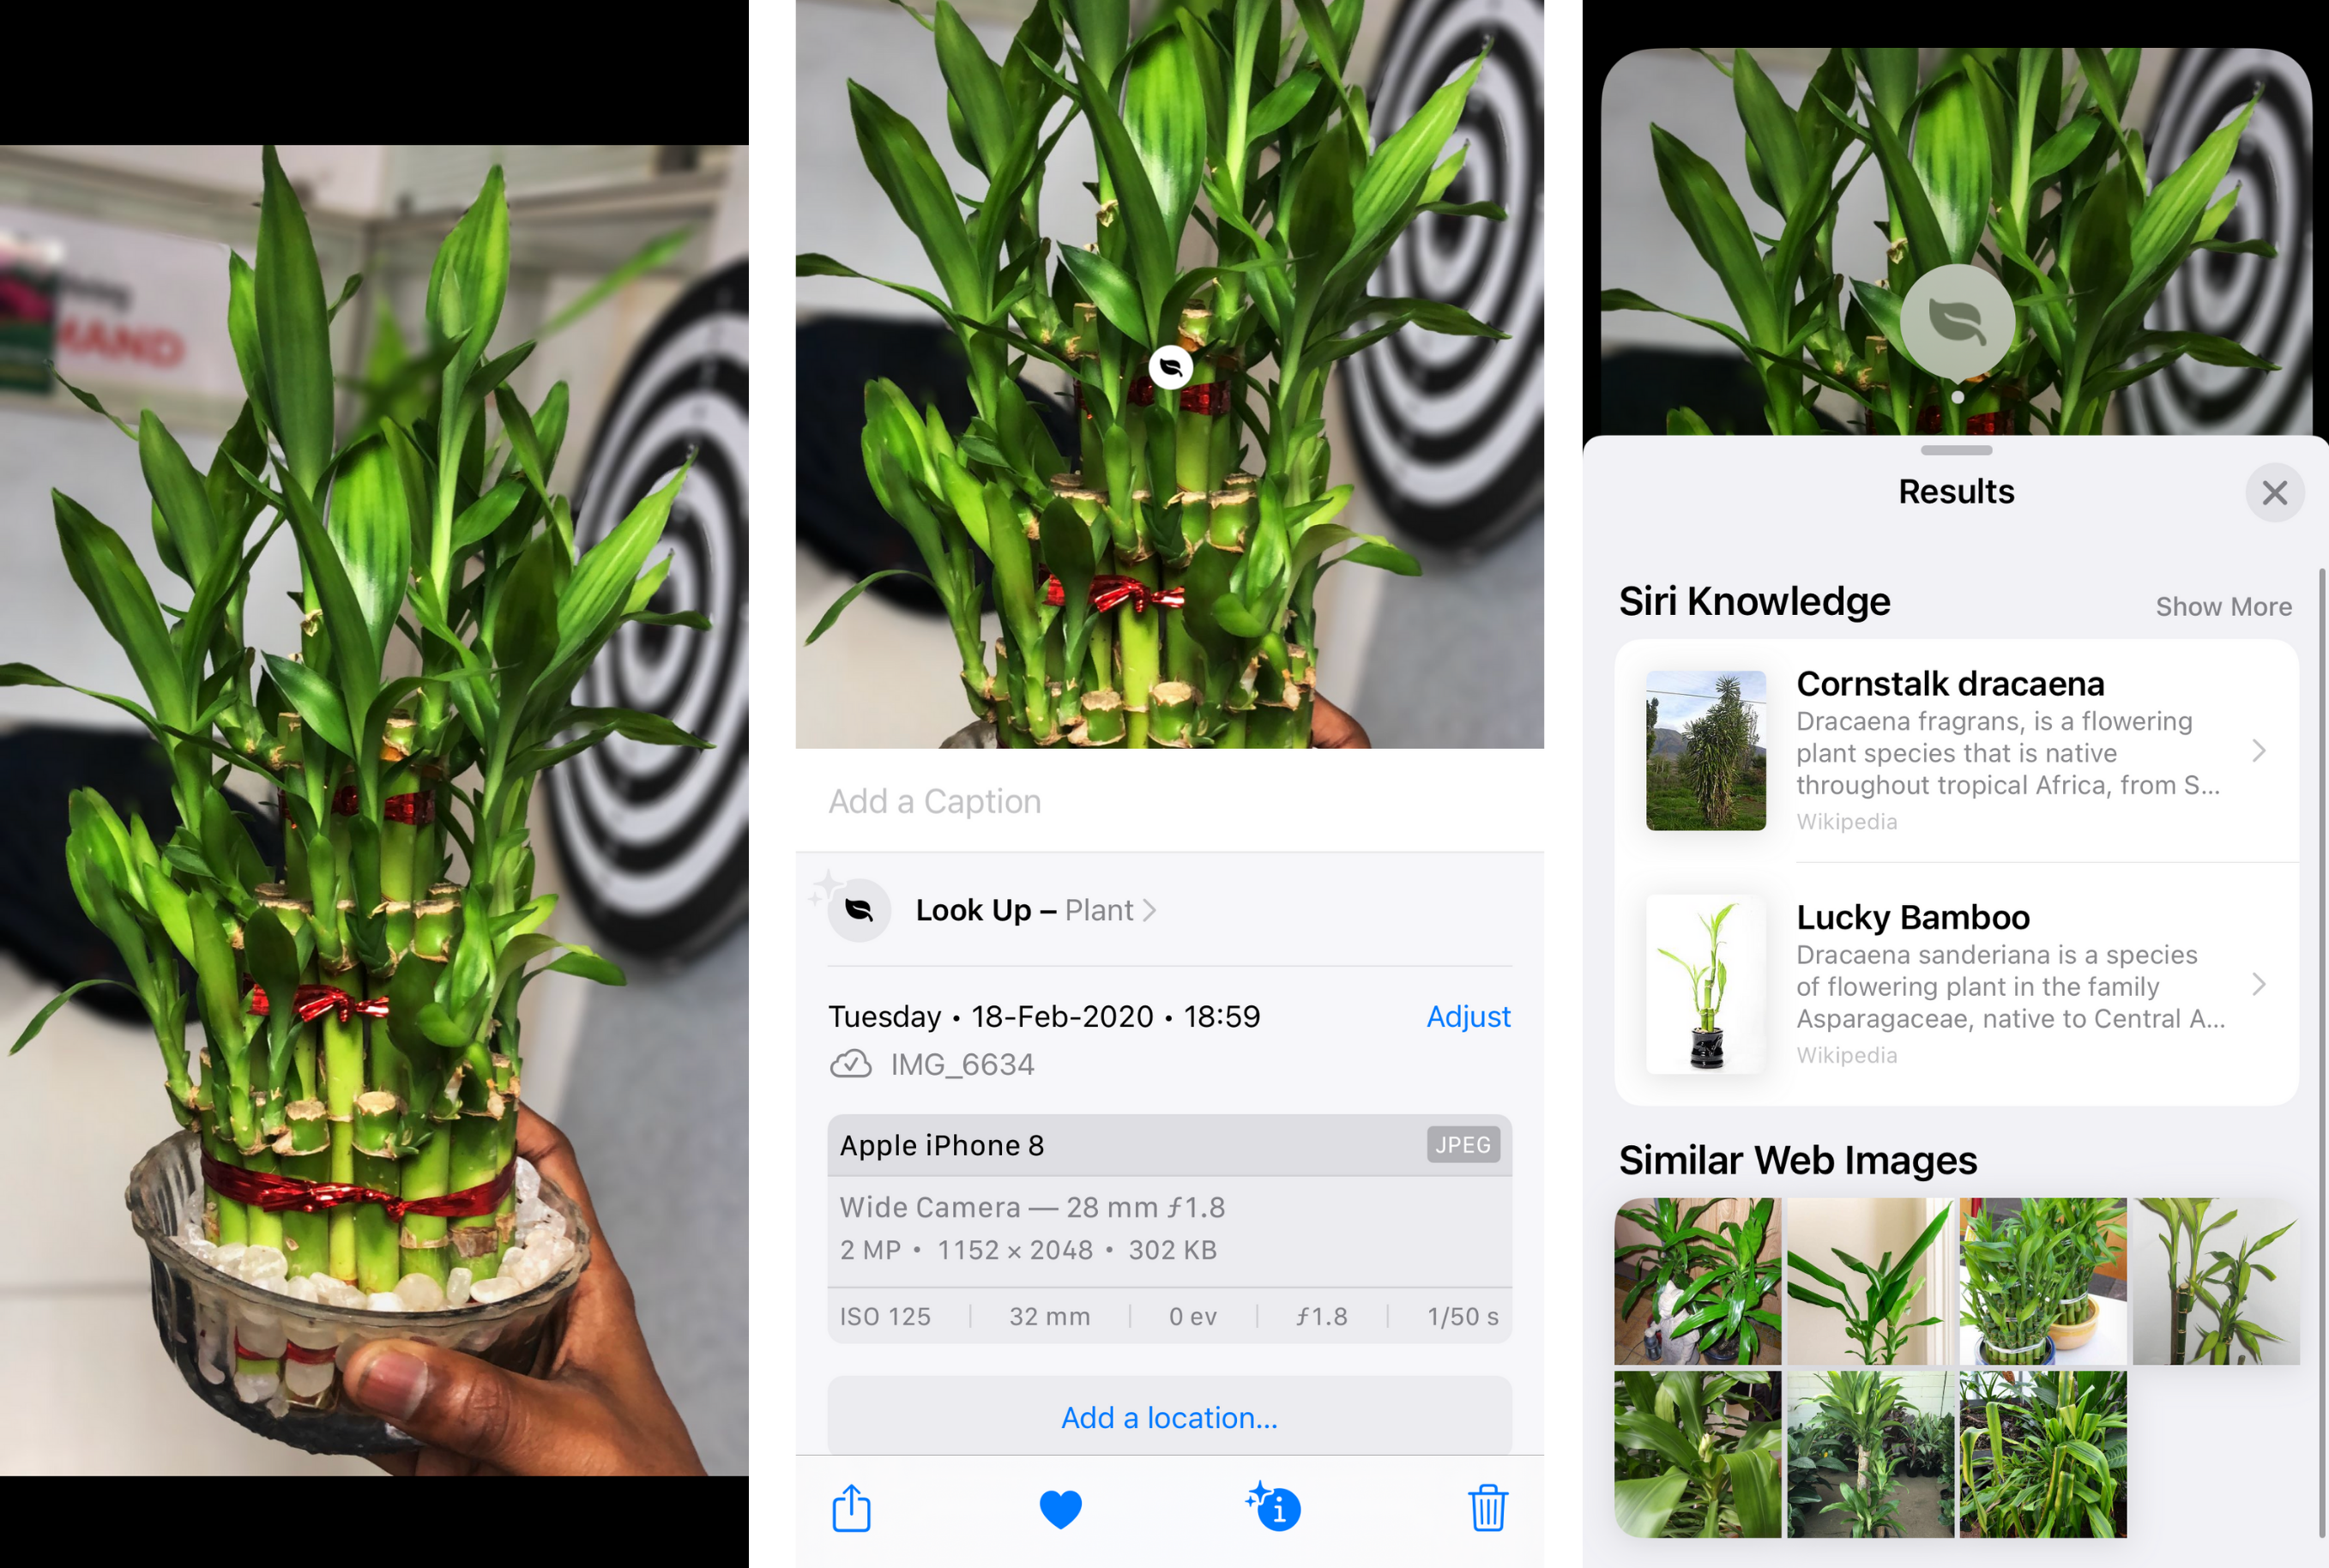 How to identify plants and animals using Apple Photos - Siri Knowledge